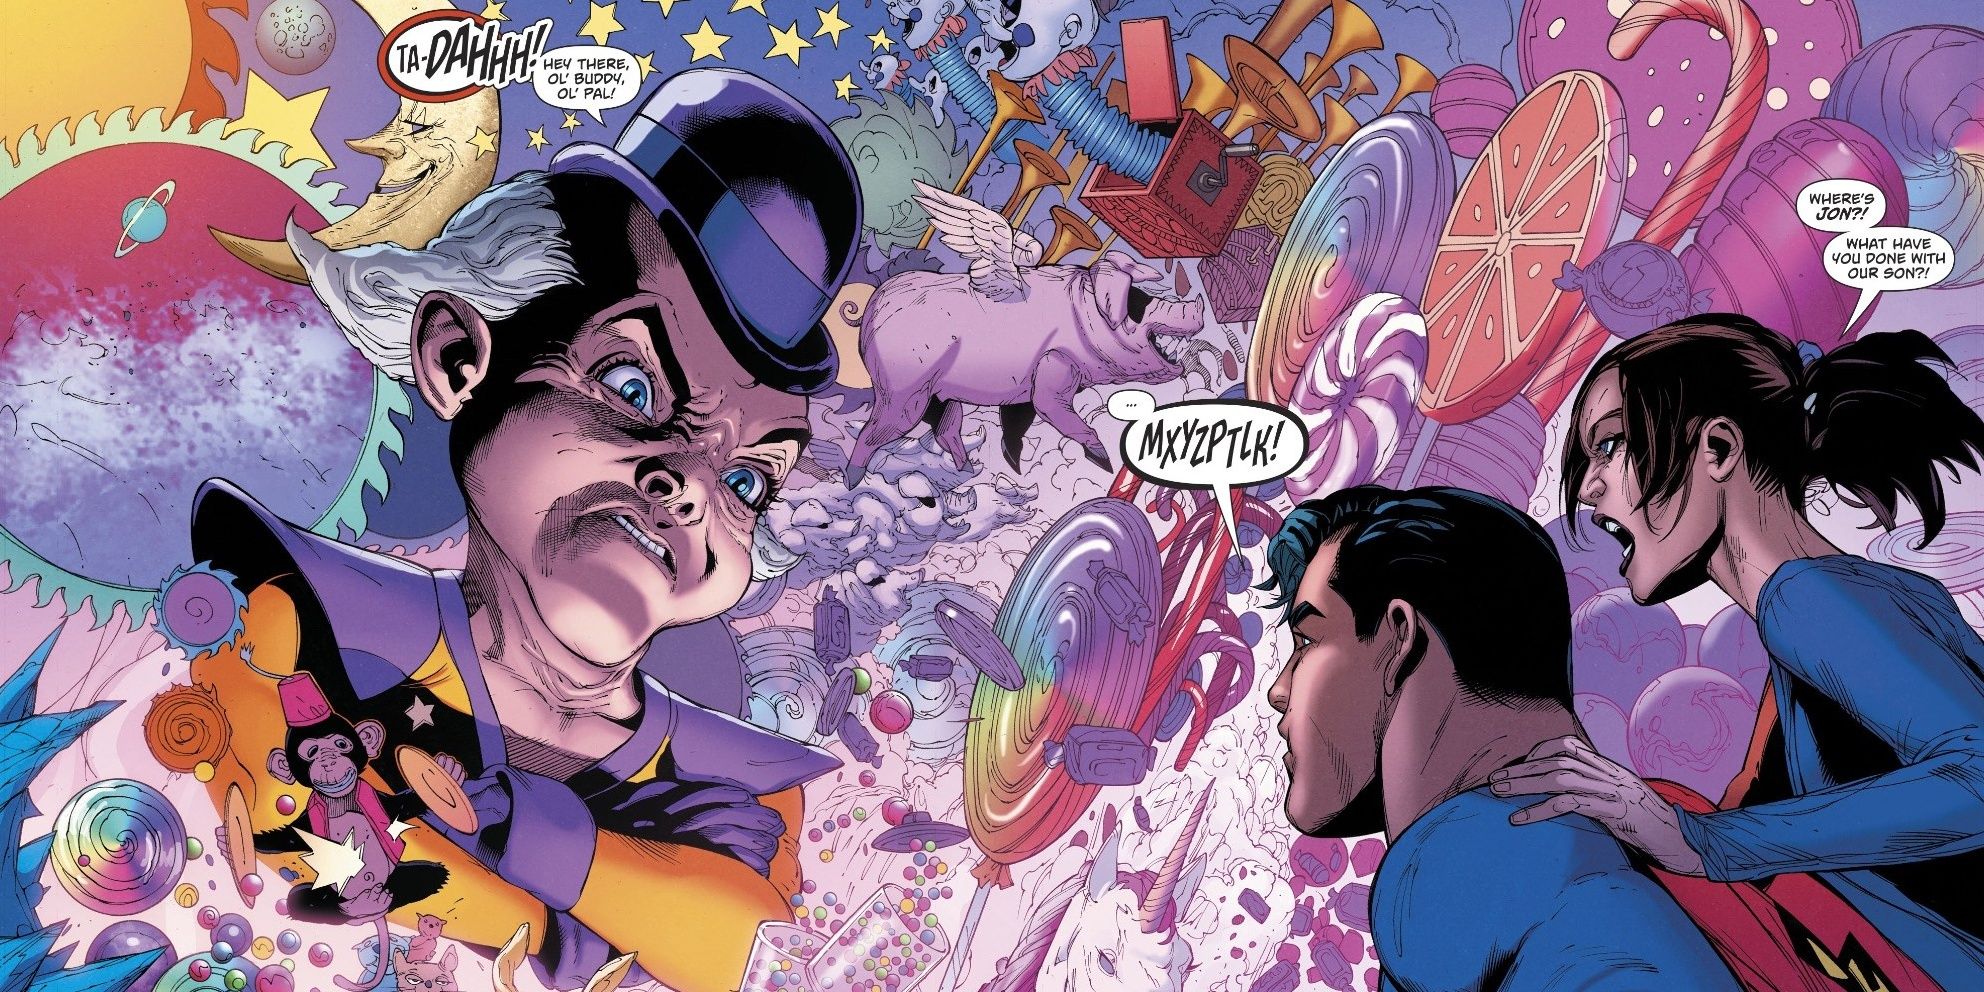 Mxyzptlk confronts Superman in a psychedelic landscape in DC Comics